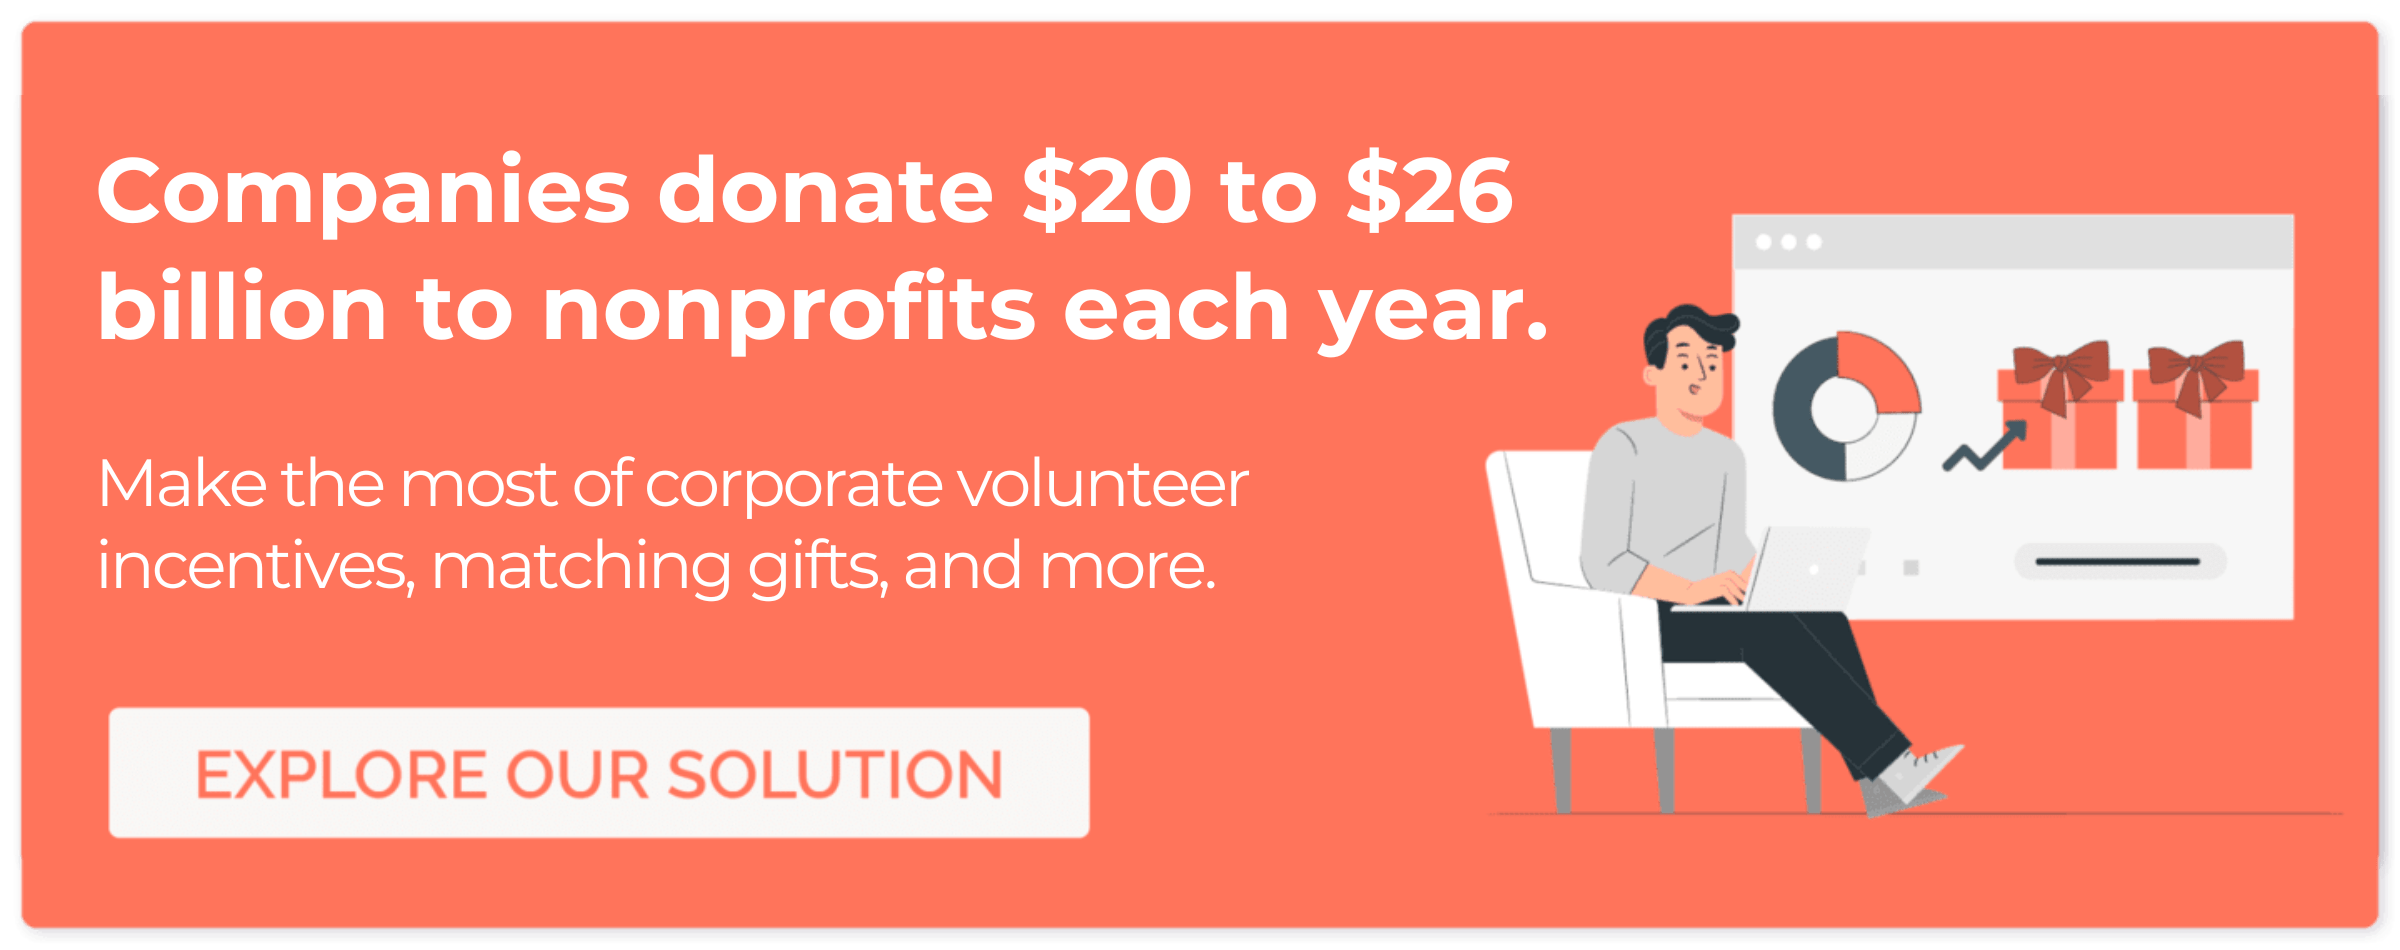 Marketing volunteer time off is an excellent way to leverage corporate philanthropy.